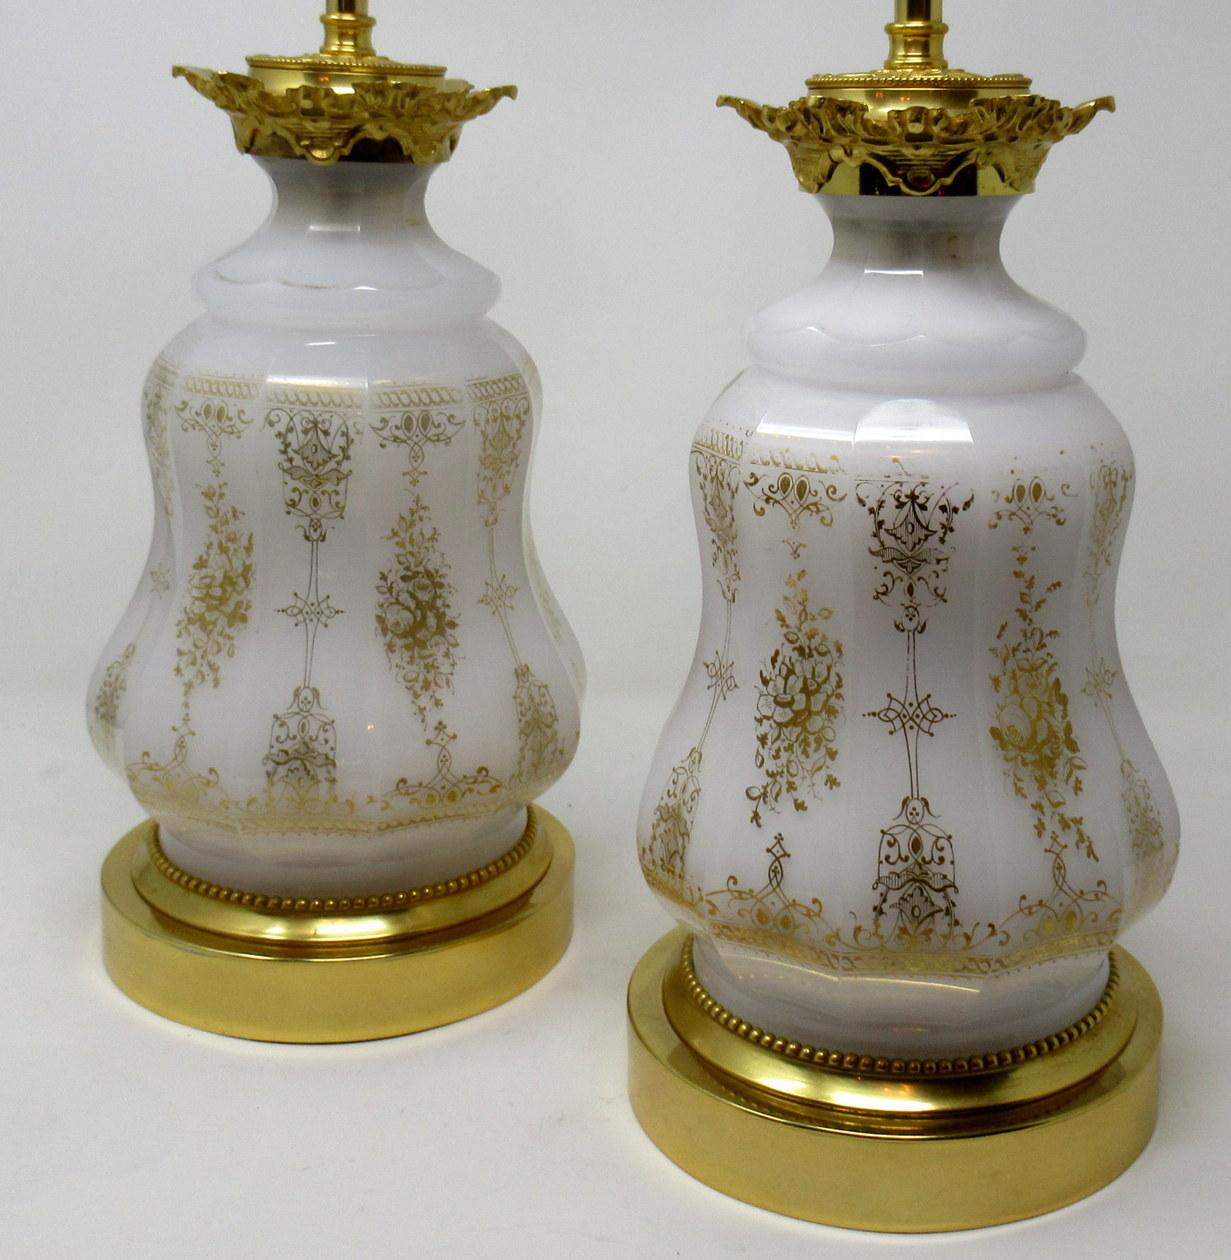 Stunning pair of French Sèvres style opaque glass oil lamps of bulbous outline, now converted to electric table lamps. Last half of the 19th century, of French origin.

The main outer bodies with lavish gilt overlaid scrolling decoration ending on